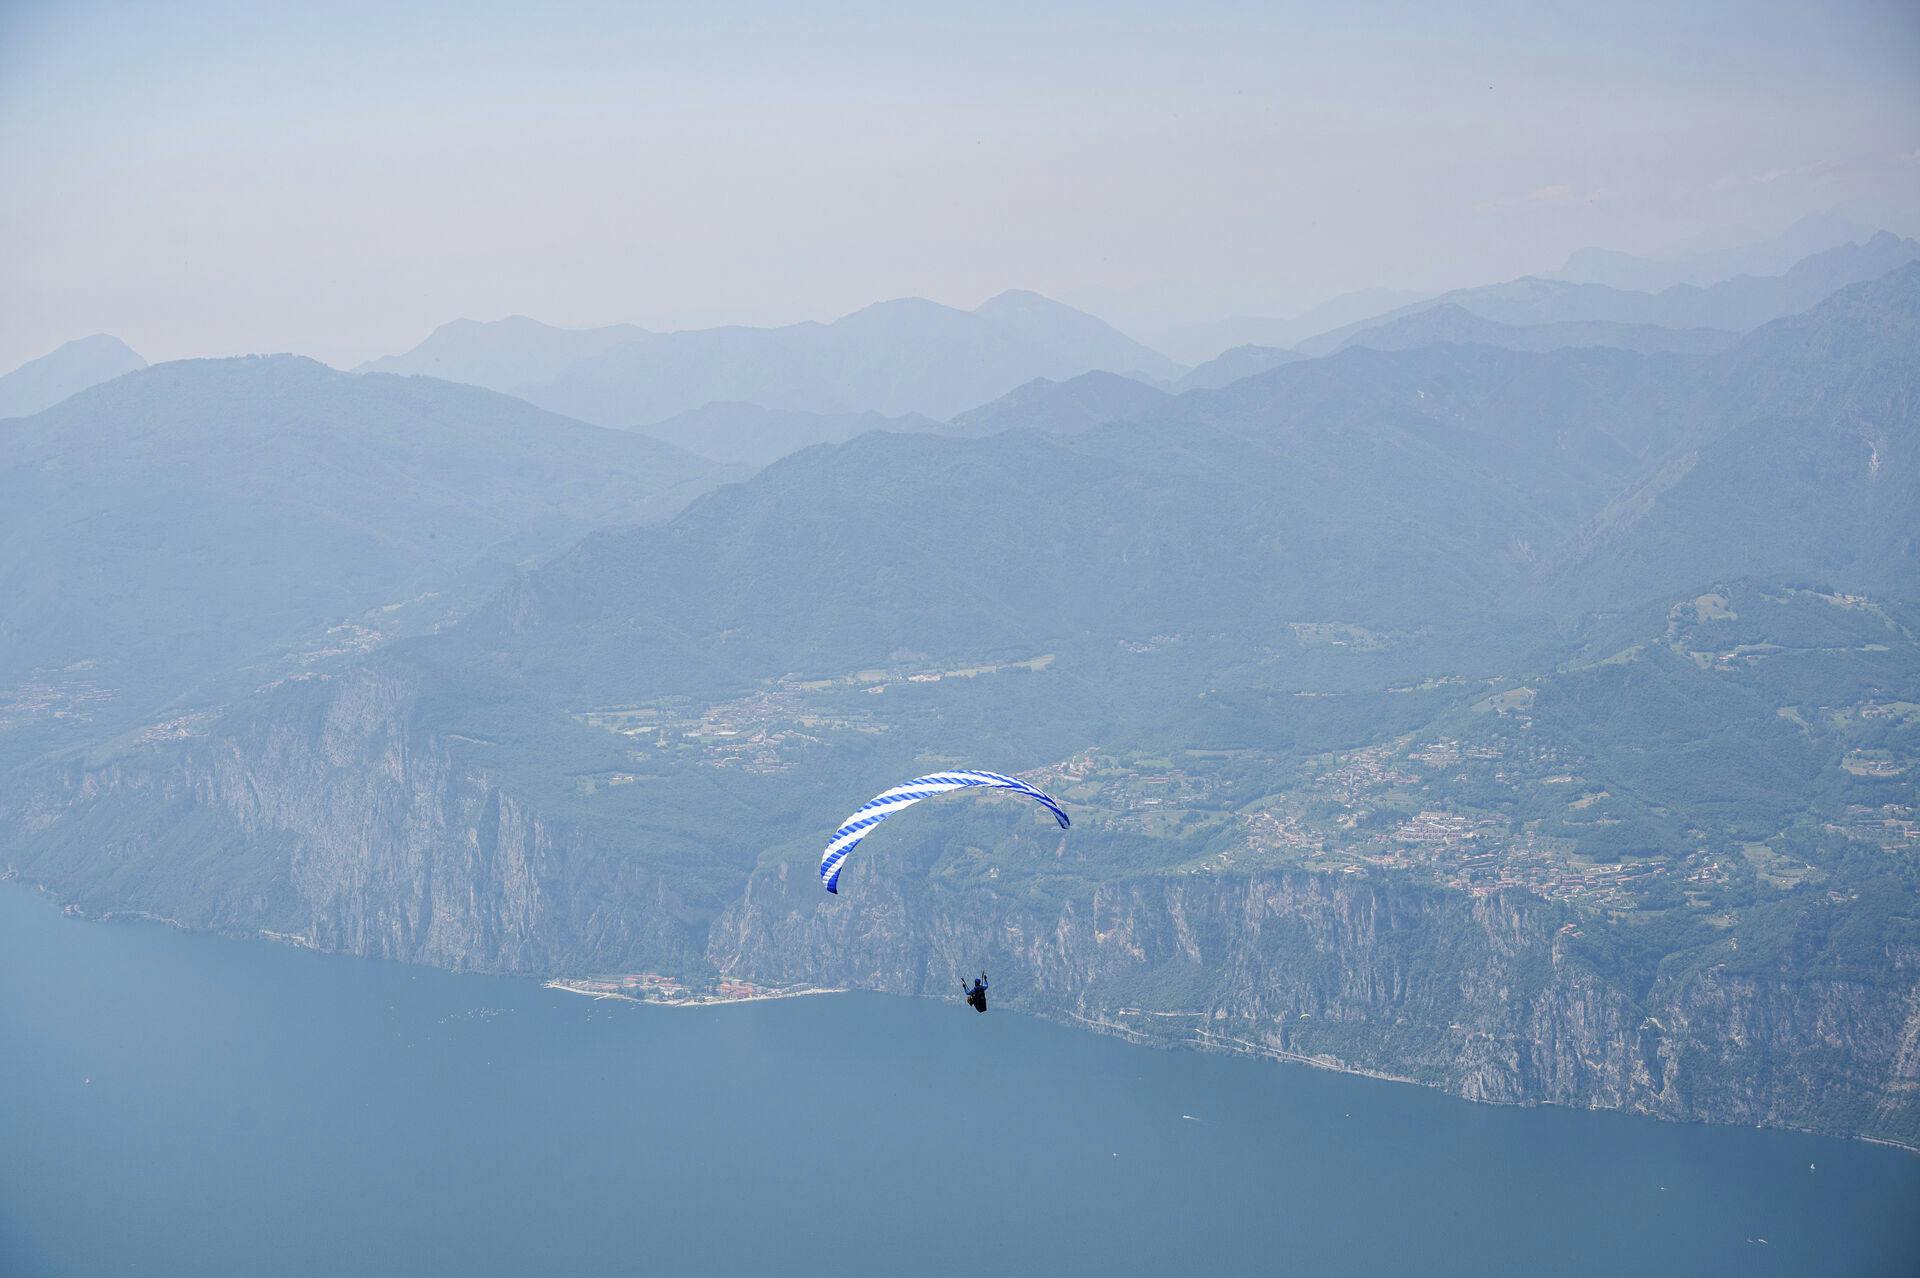 15 June 2021, Italy, Malcesine: View from the mountain Monte Baldo to the Lake Garda, above the water a paraglider is flying. Photo by: Daniel Reinhardt/picture-alliance/dpa/AP Images